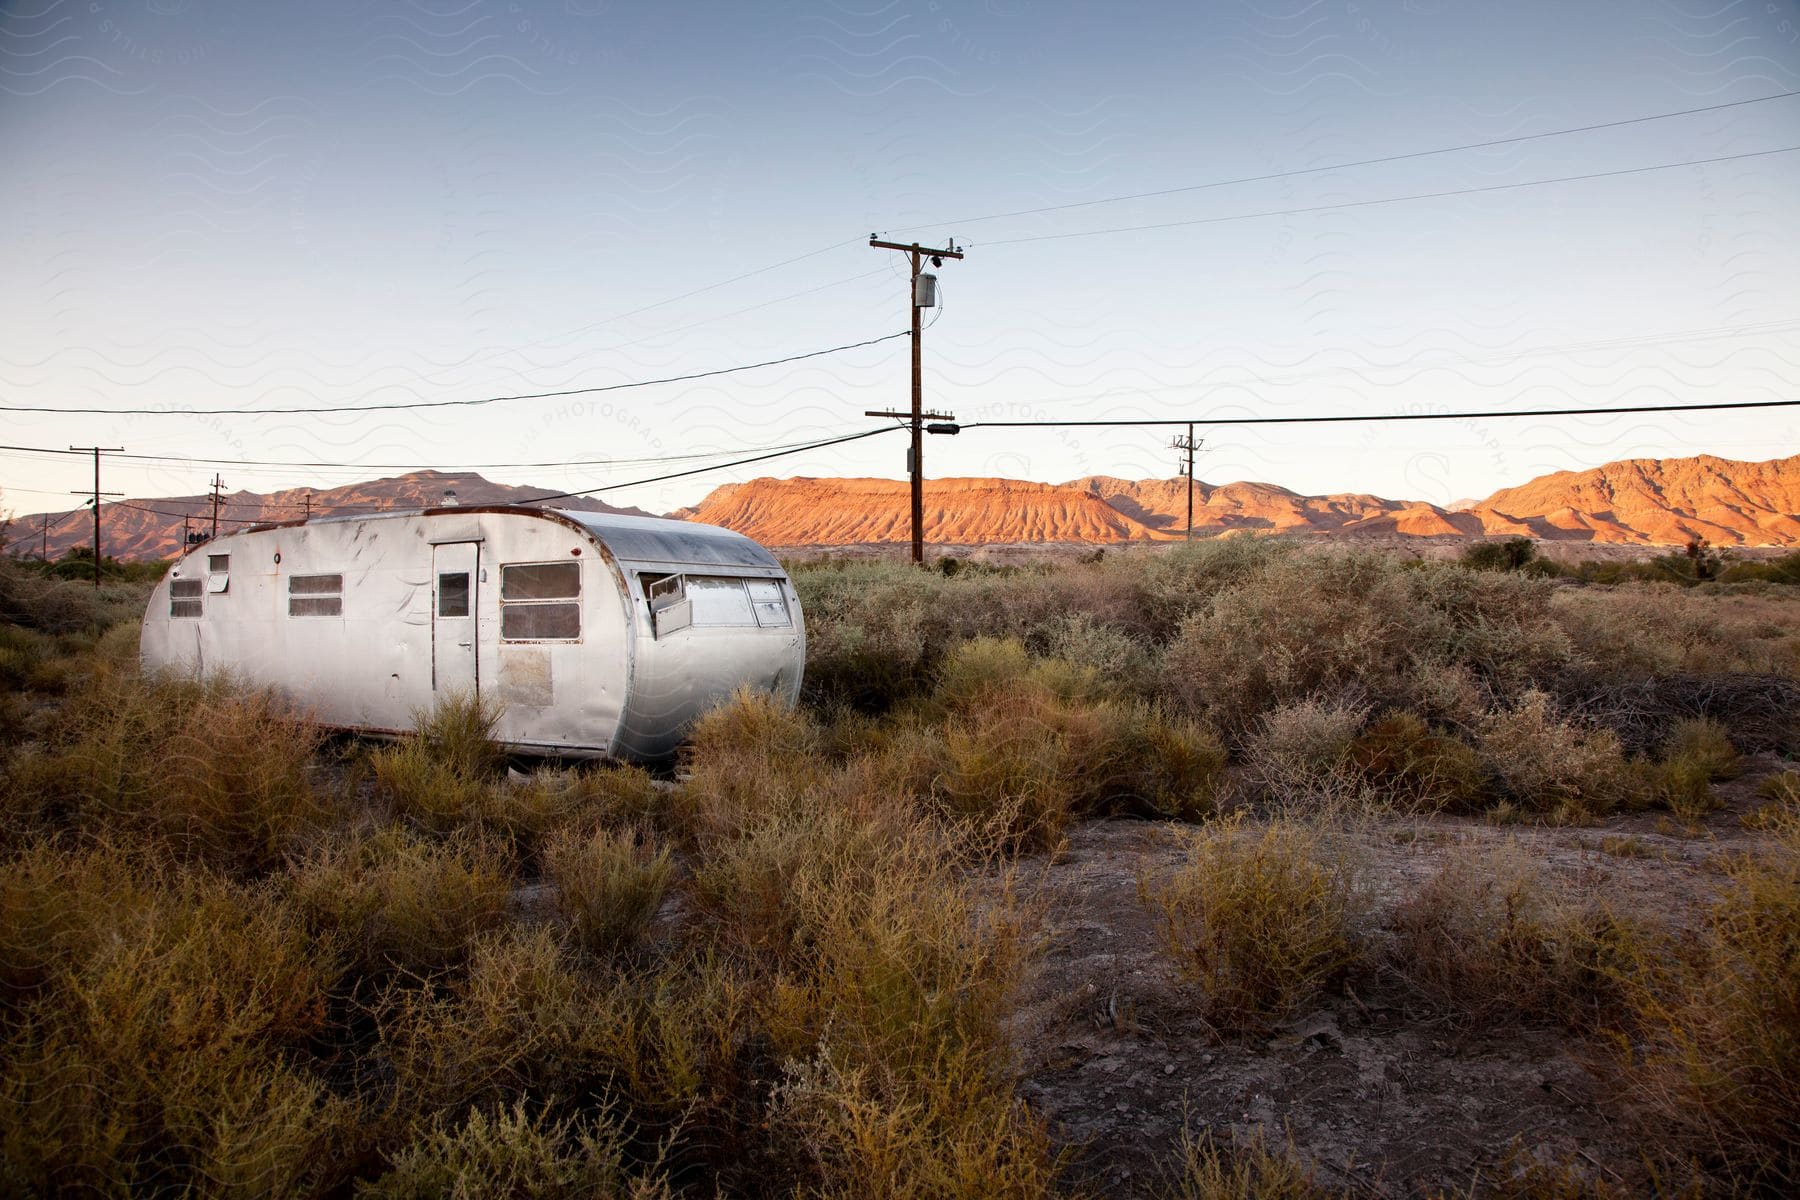 An old camper sits among plants with utility wires stretching across the landscape and mountains in the distance